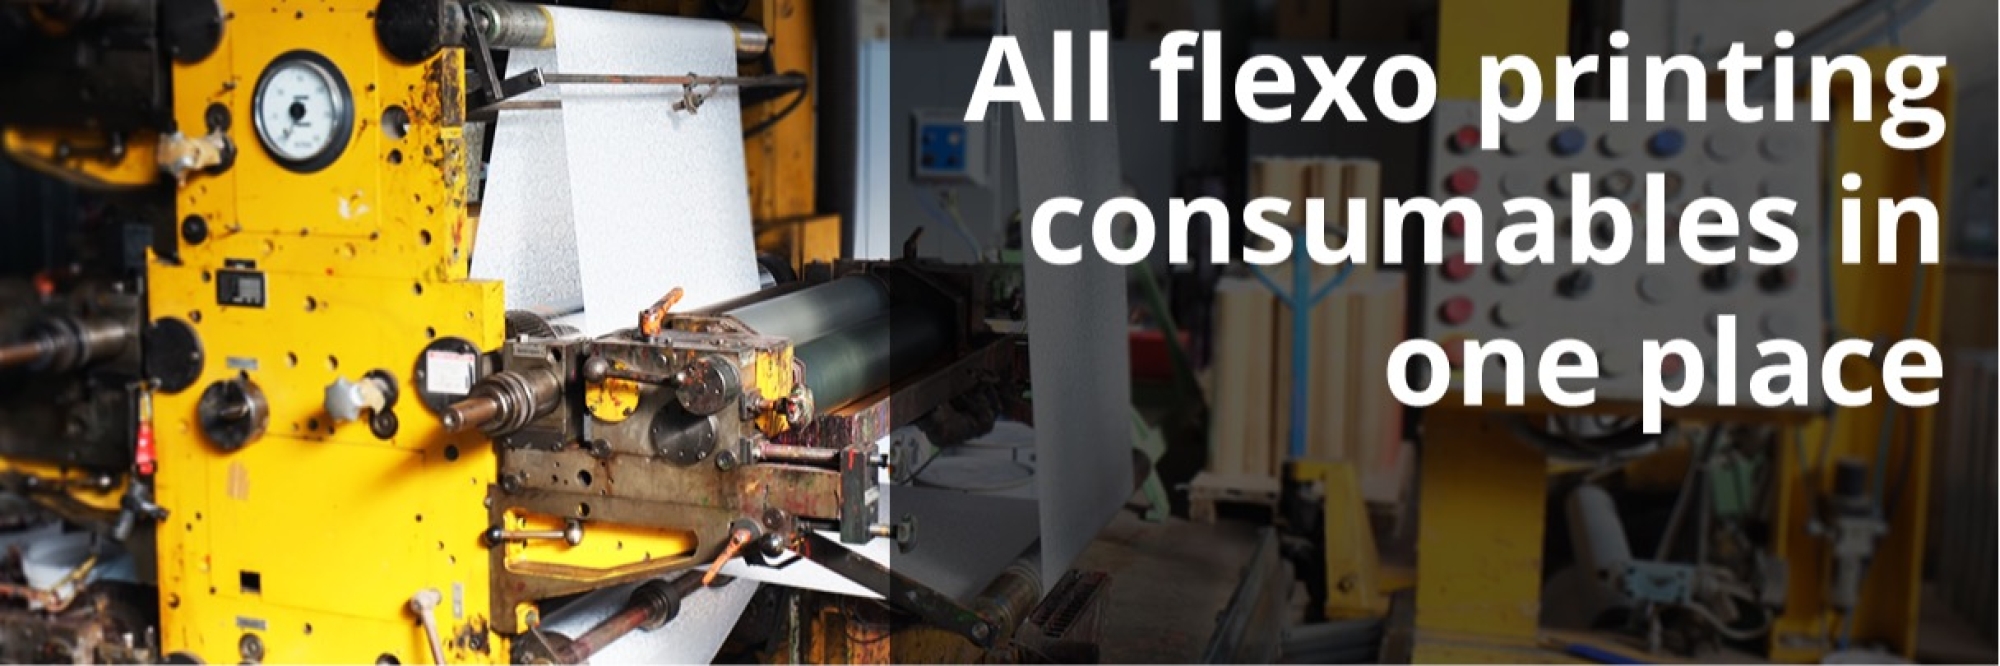 All flexo printing consumables in one place 